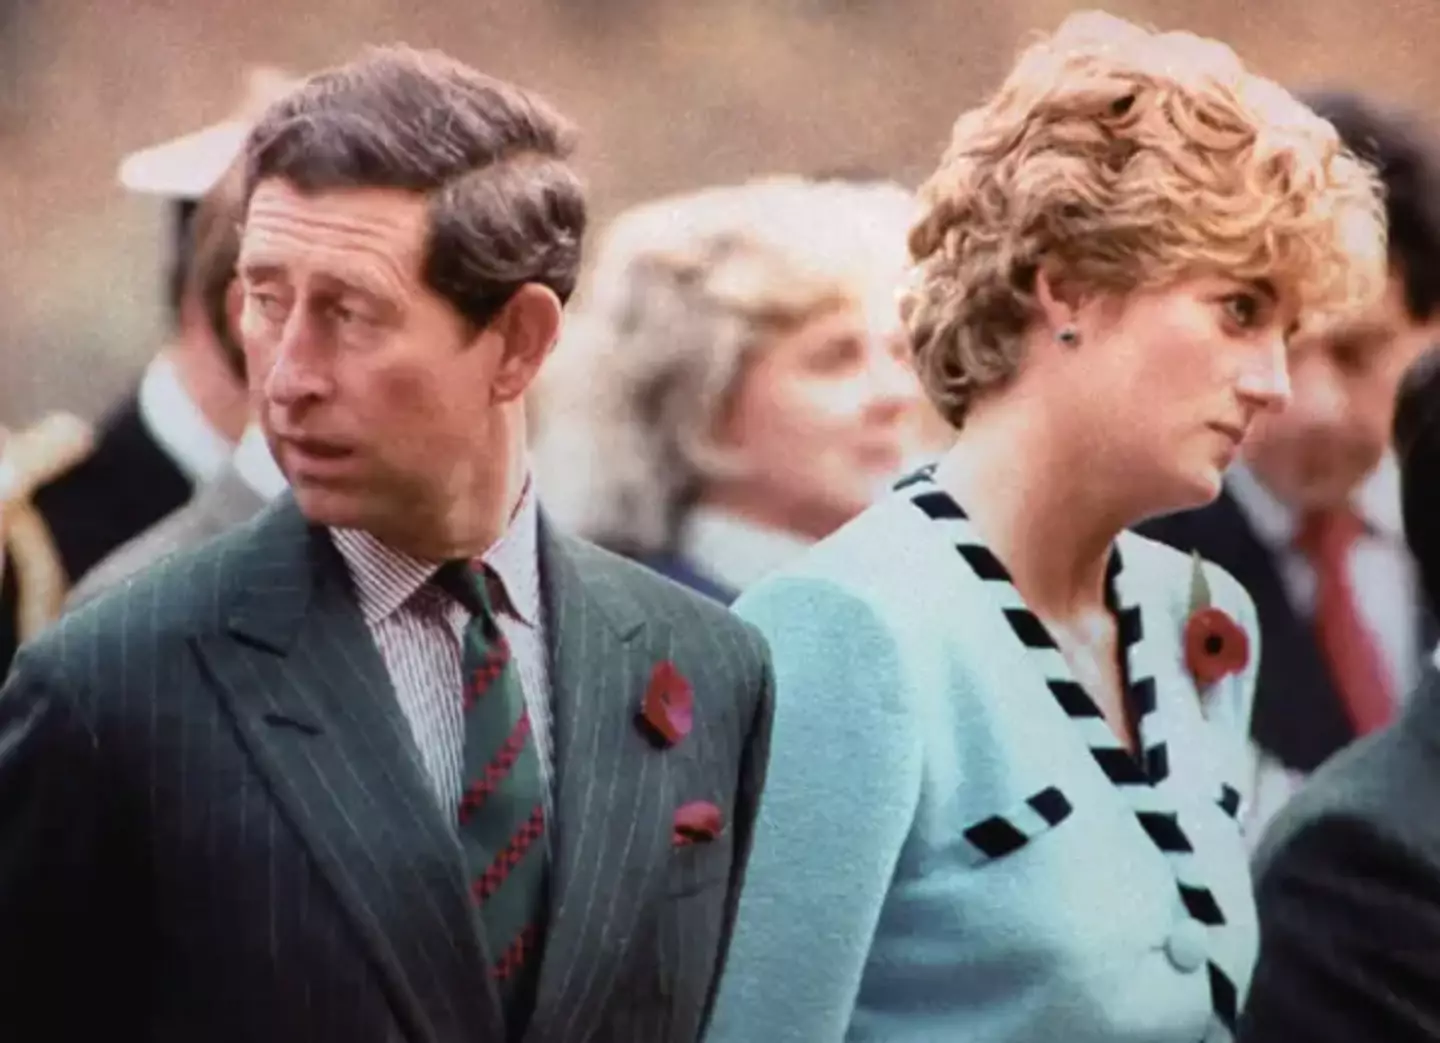 Princess Diana was married to Prince Charles for 15 years. (